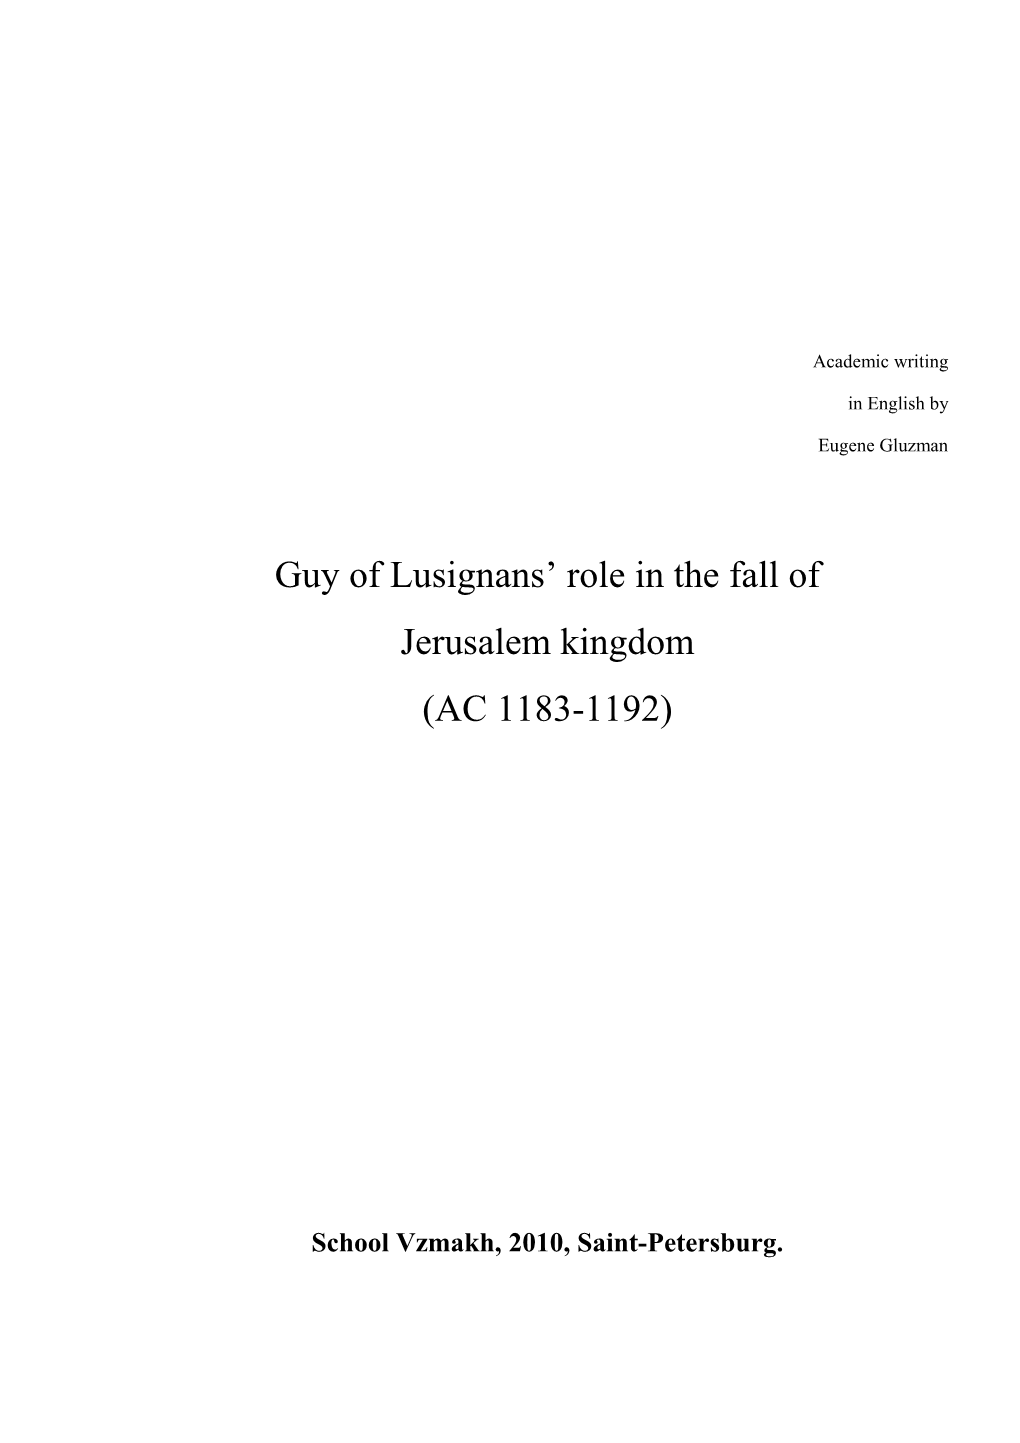 Guy of Lusignans Role in the Fall Of